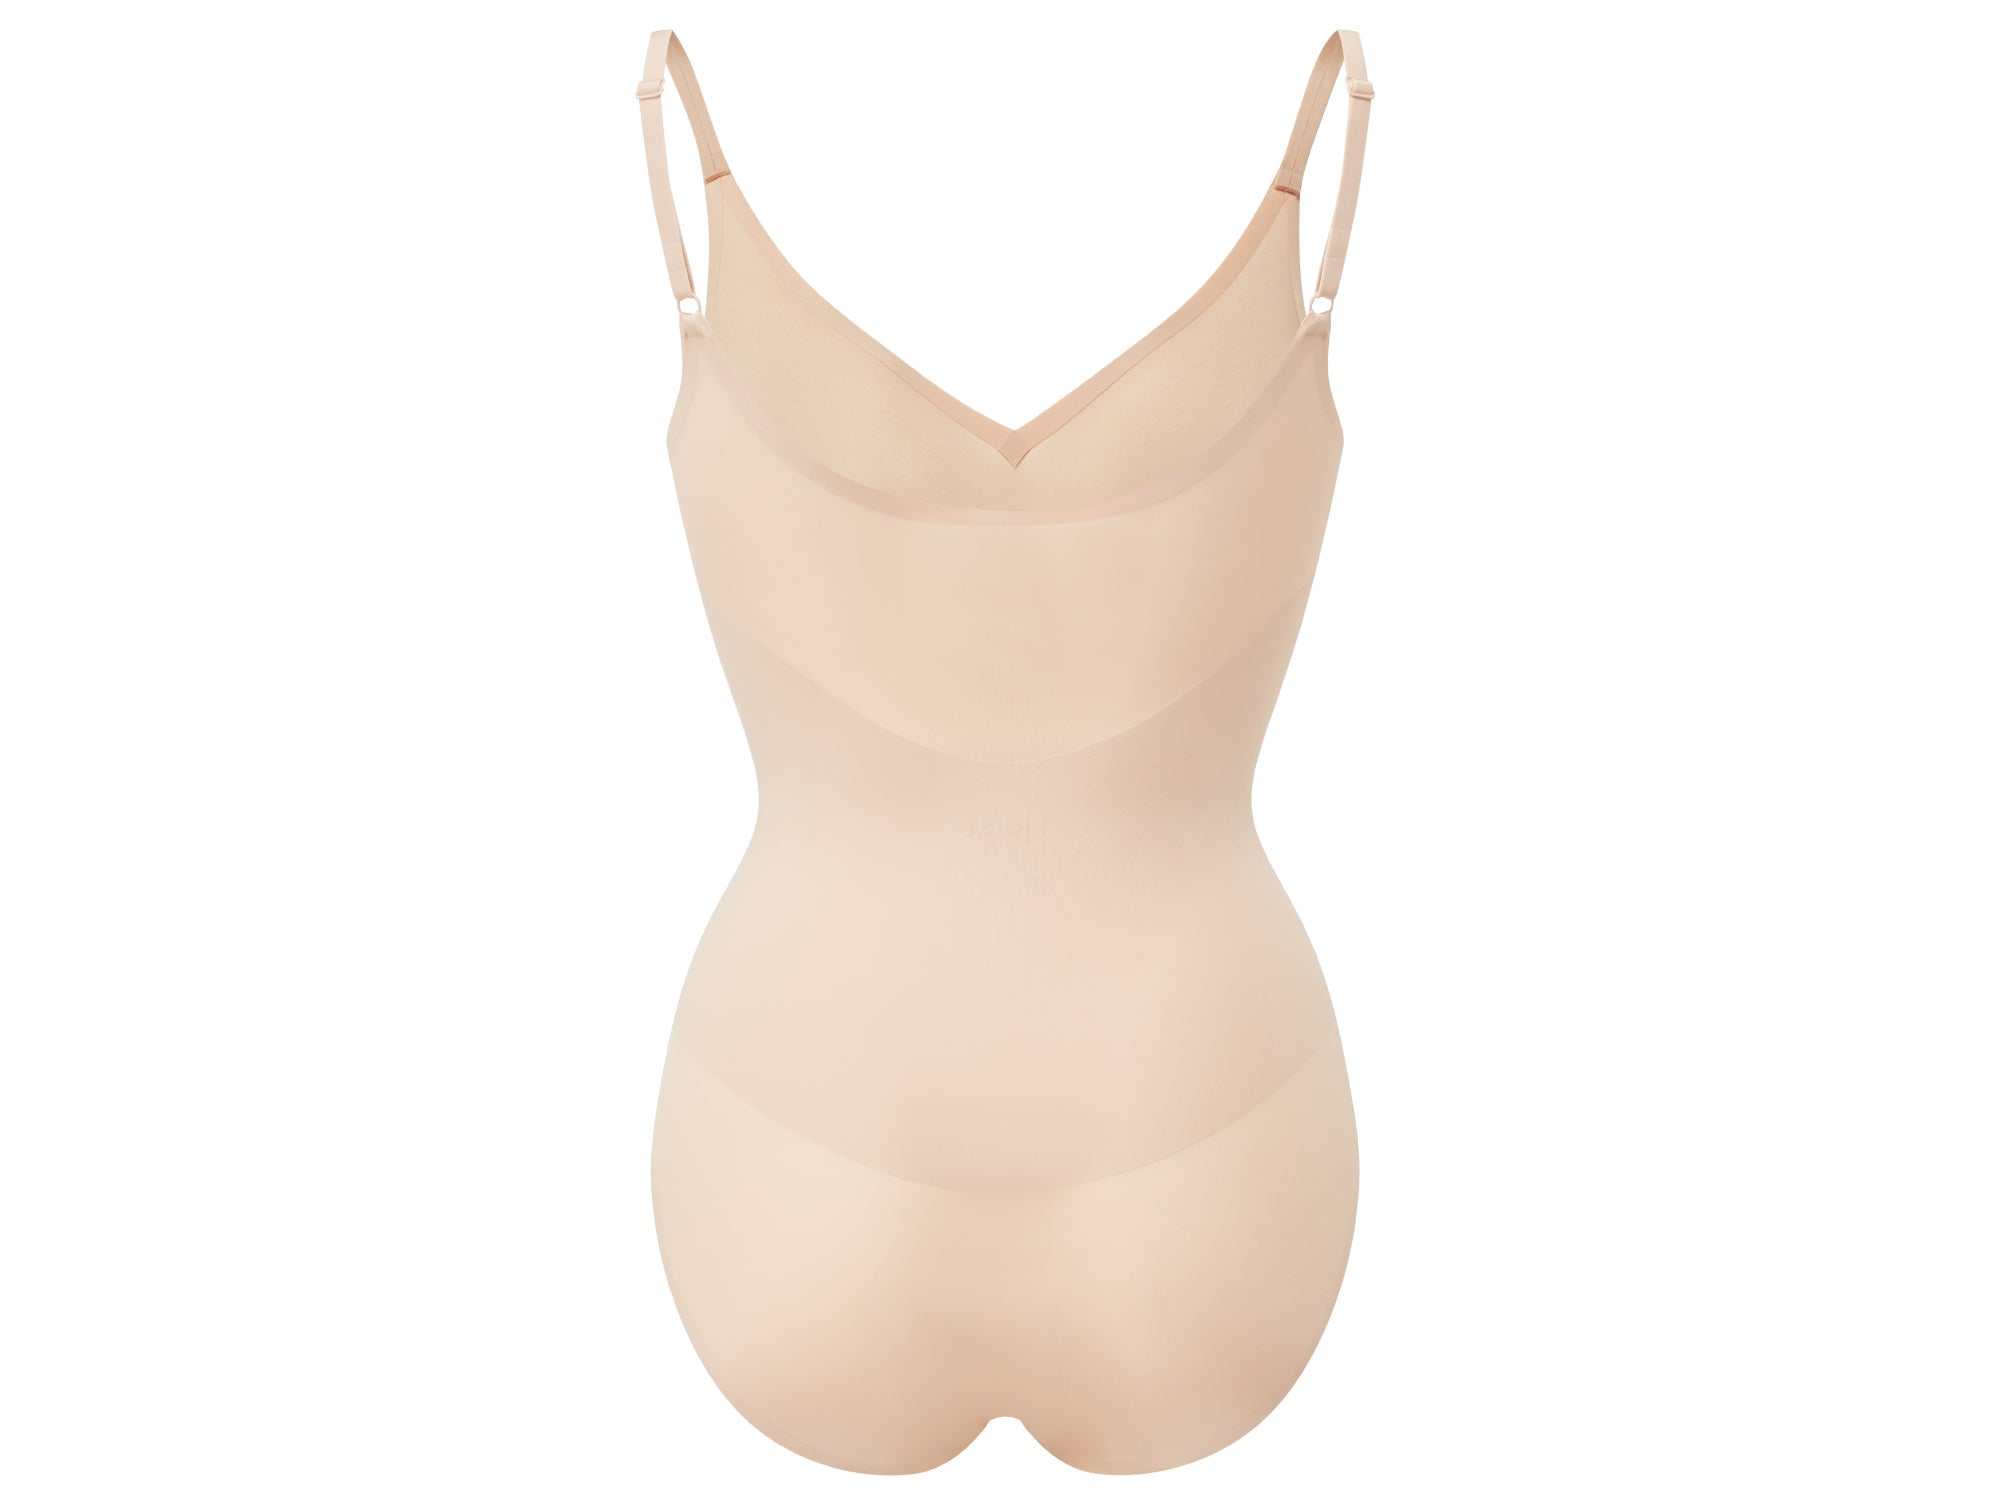 Buy Heist Sculpt Outer Body Shaping Bodysuit from the Next UK